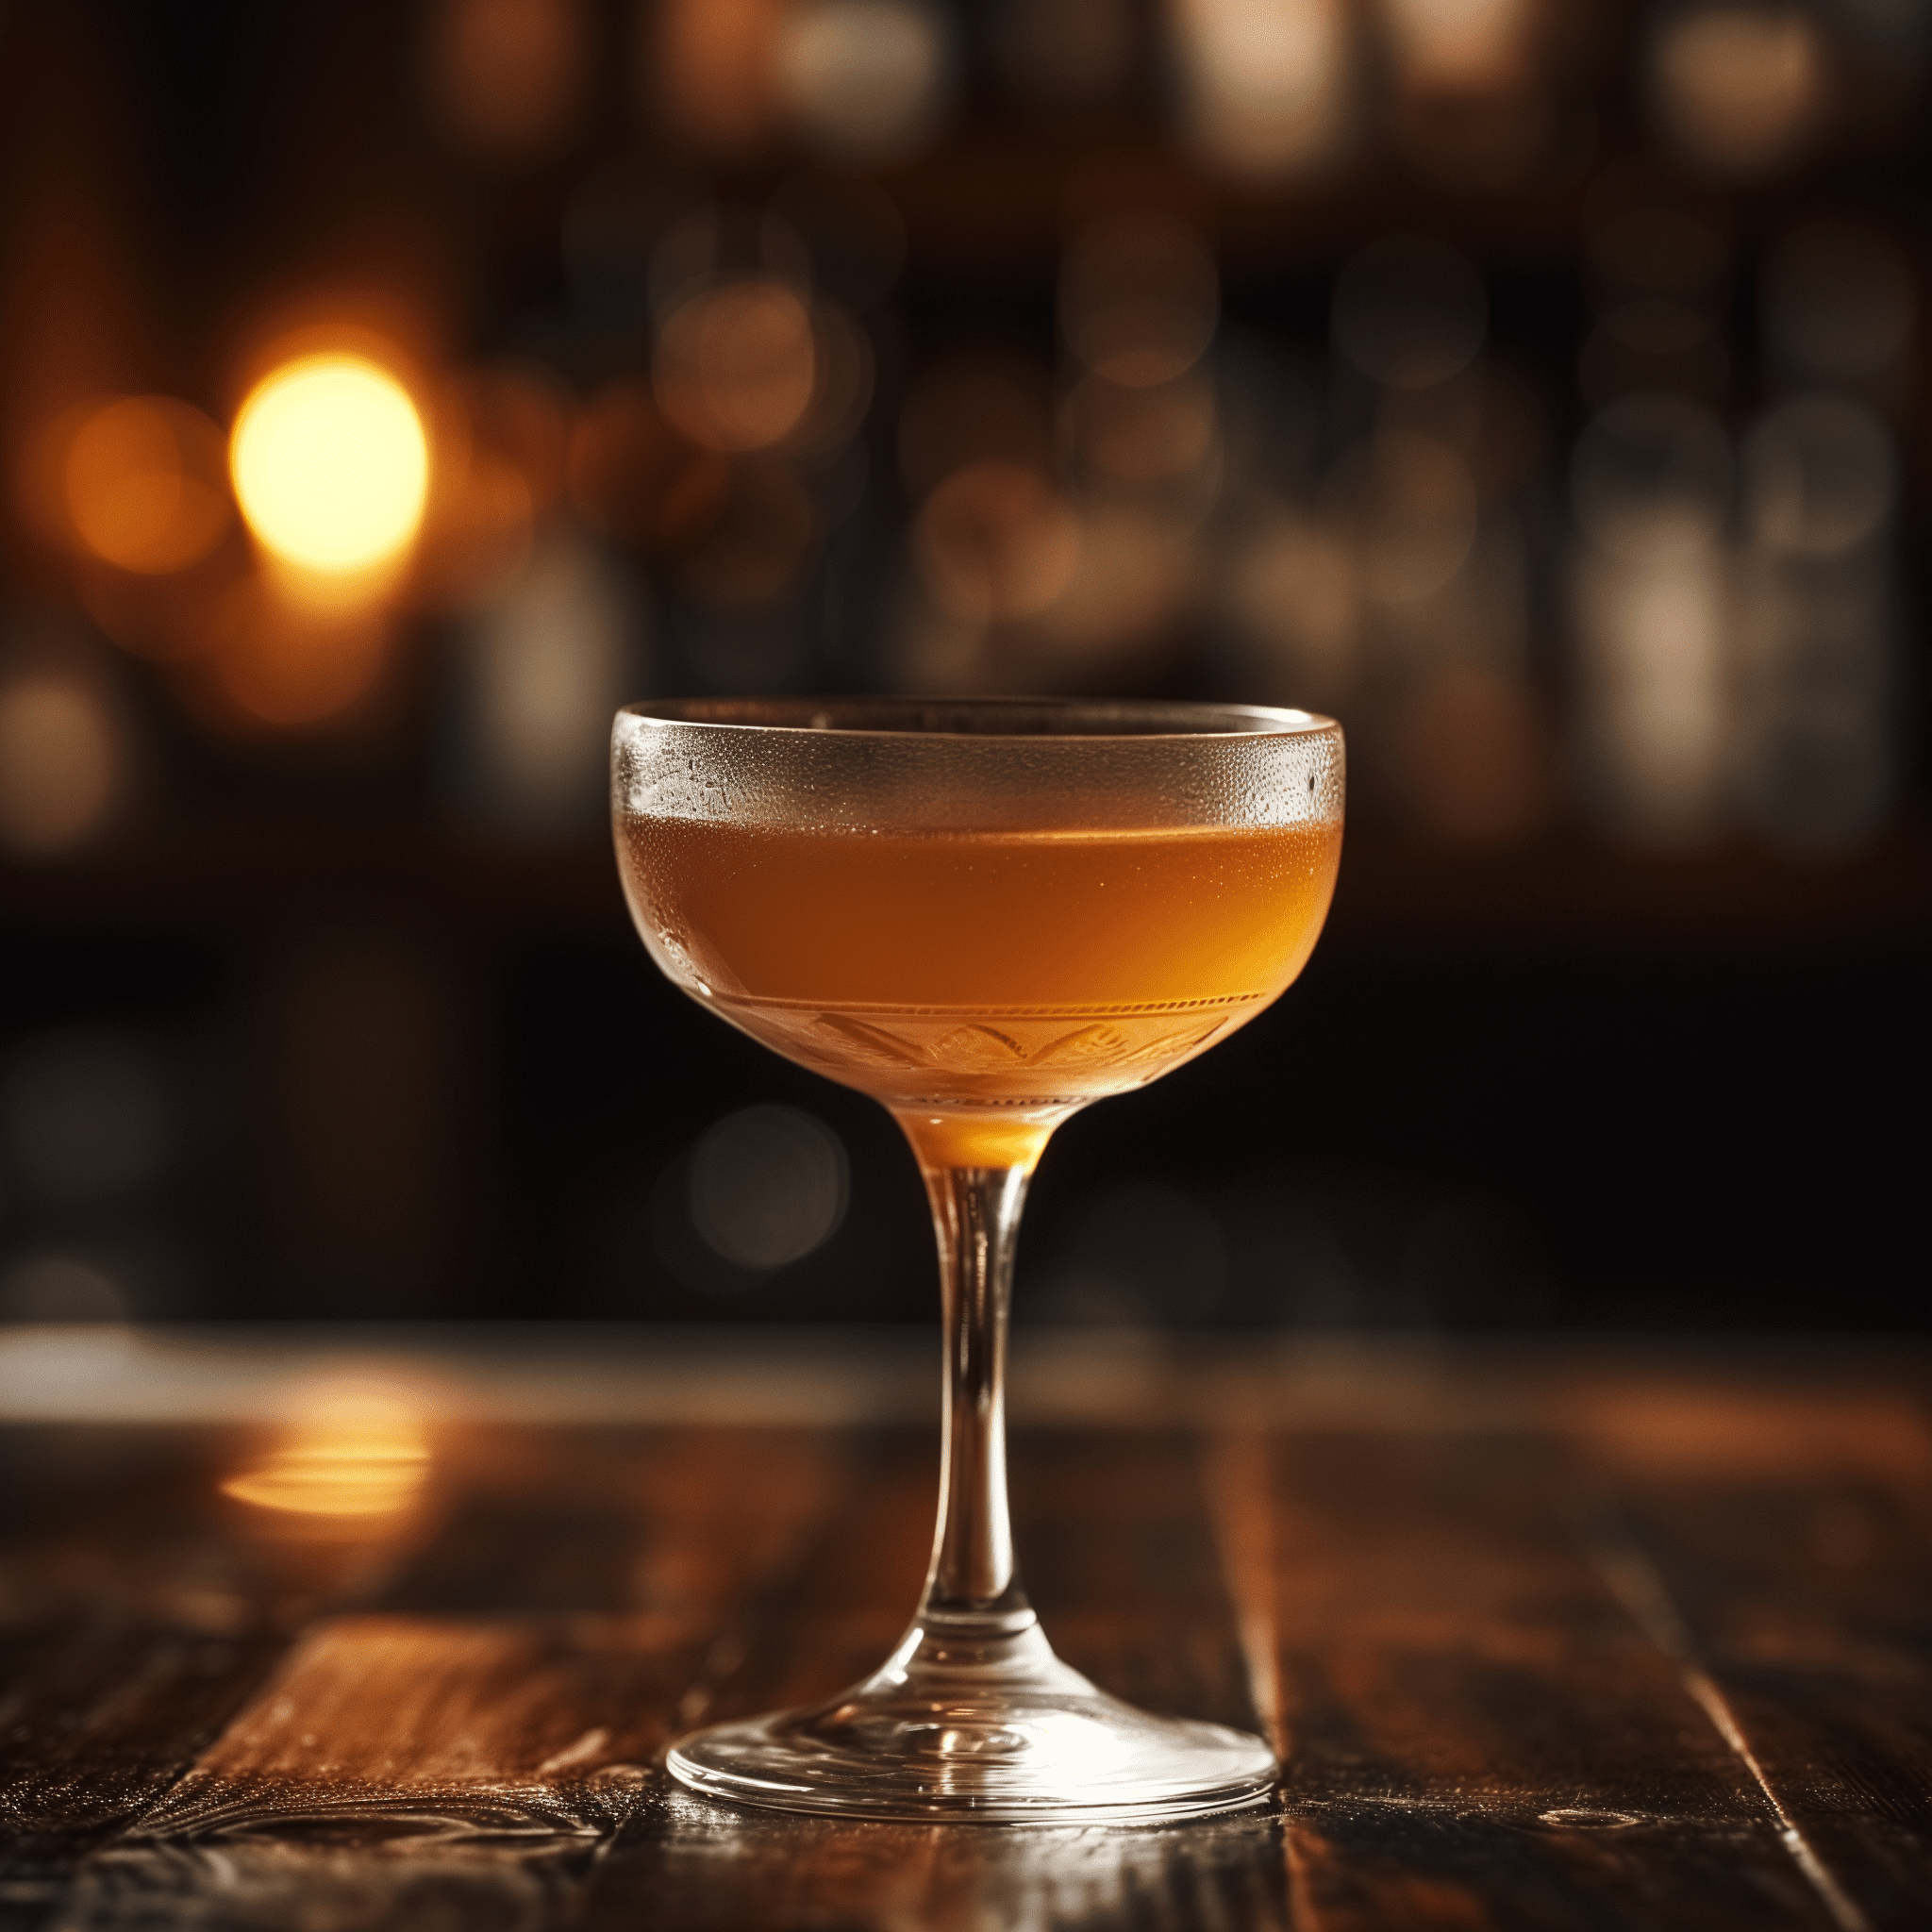 Palmetto Cocktail Recipe - The Palmetto cocktail has a rich and velvety taste, with the warmth of the rum complemented by the herbal and slightly sweet notes of the sweet vermouth. The orange bitters add a subtle citrusy zing, creating a well-rounded and sophisticated flavor profile.